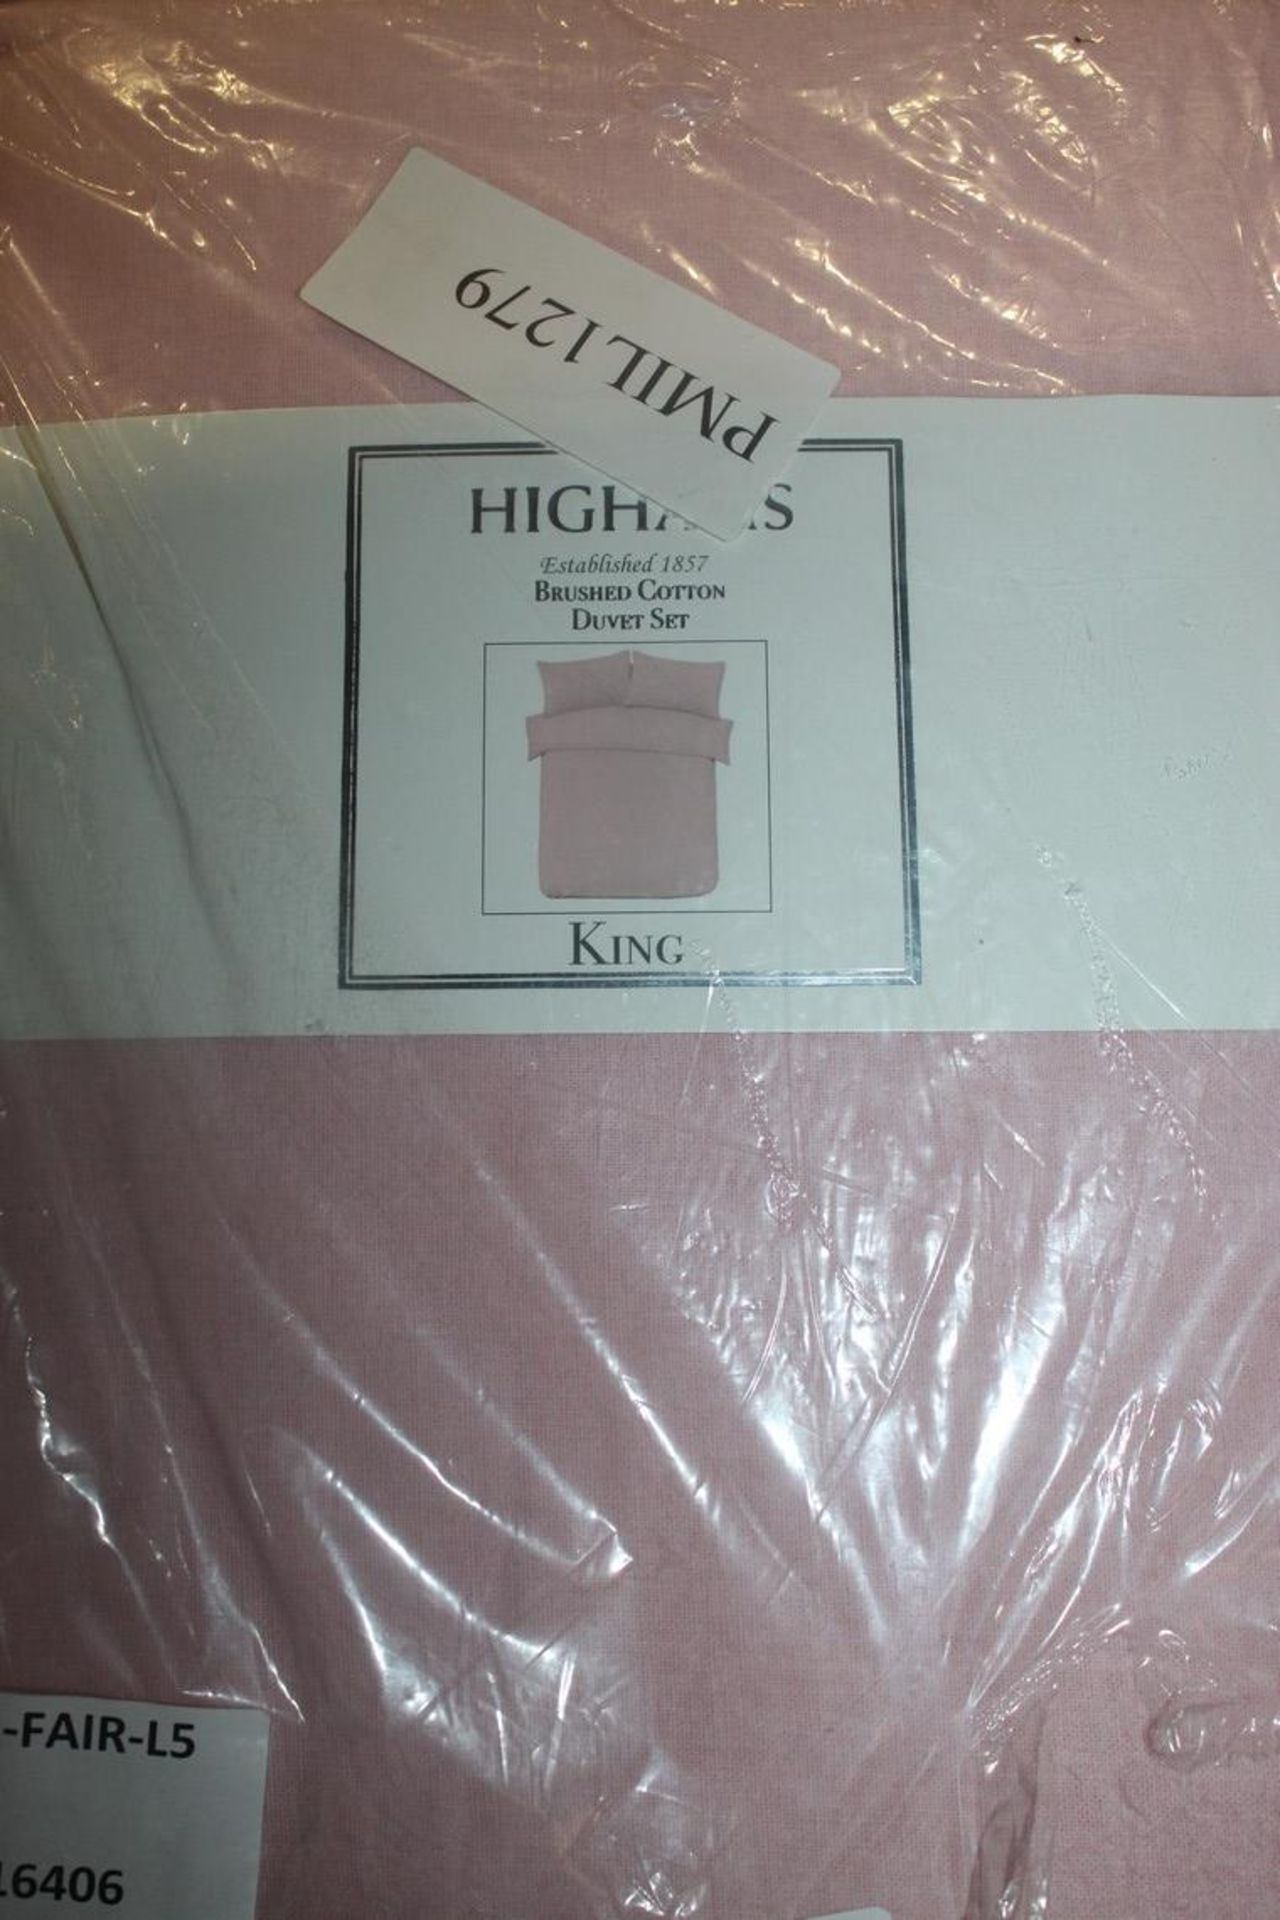 Bagged Higham's Brushed Cotton King Size Duvet Set in Pink RRP £50 (16406) (Appraisals Are Available